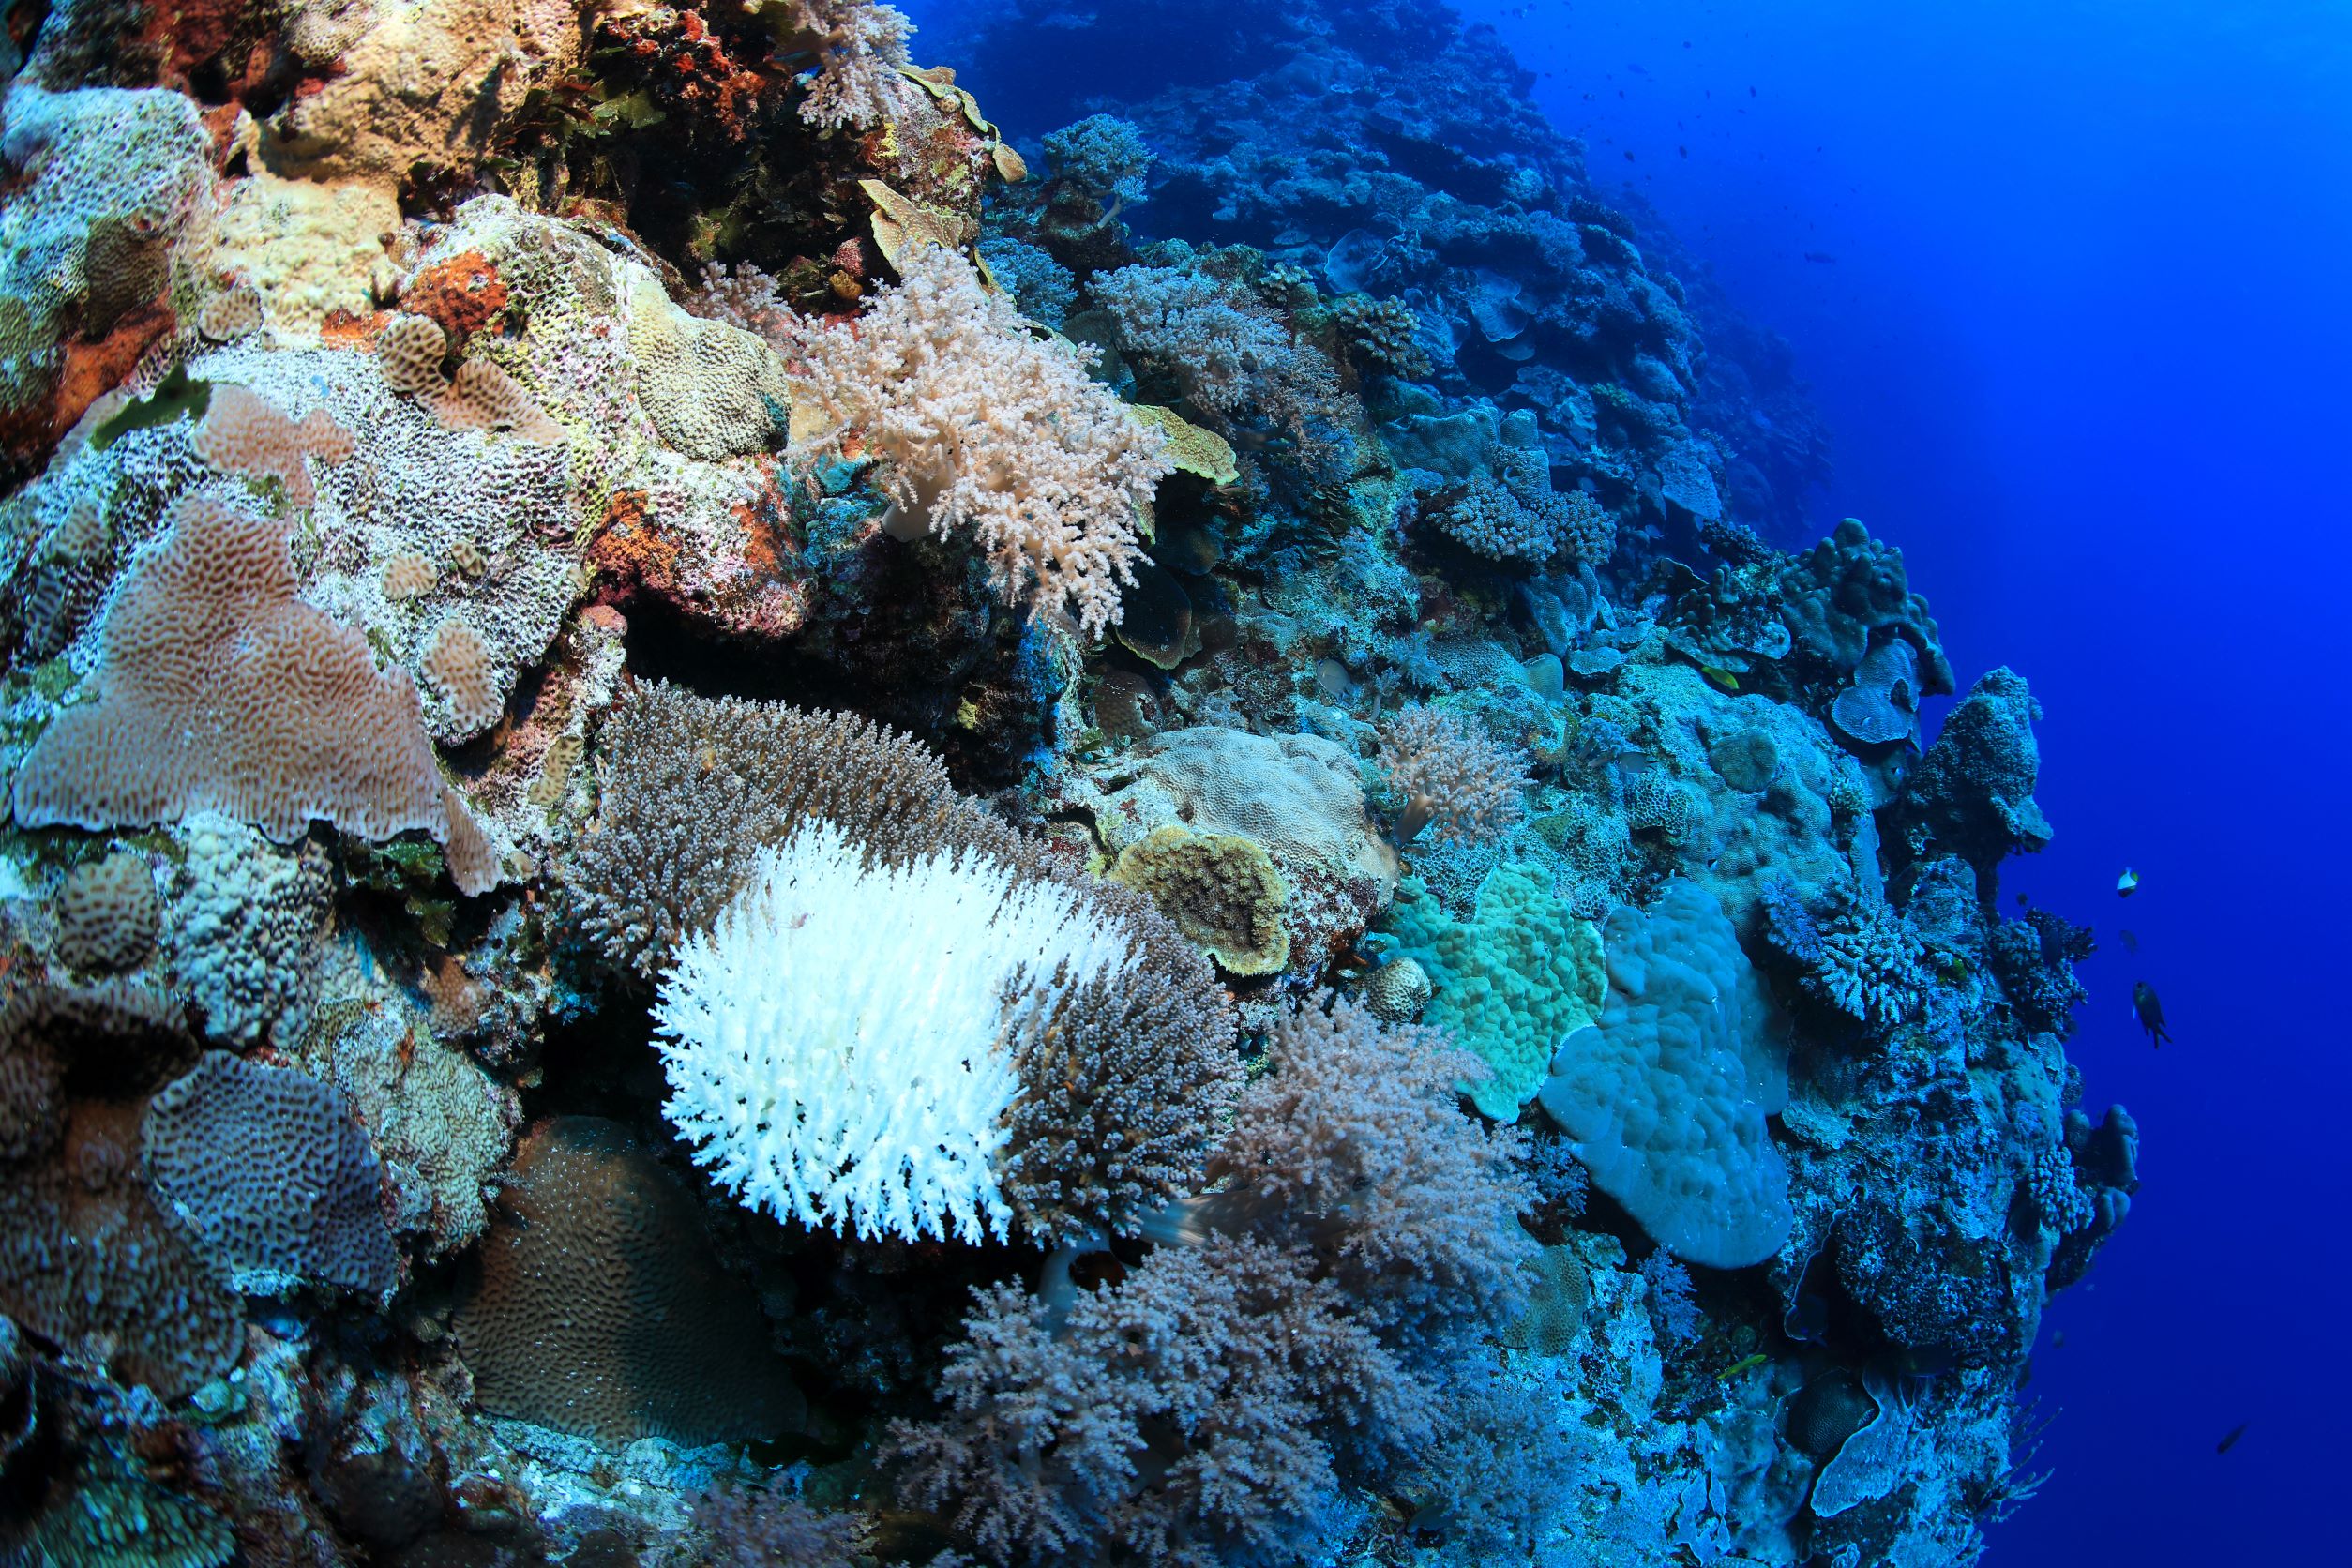 Impacts of climate change on World Heritage coral reefs: update to the  first global scientific assessment